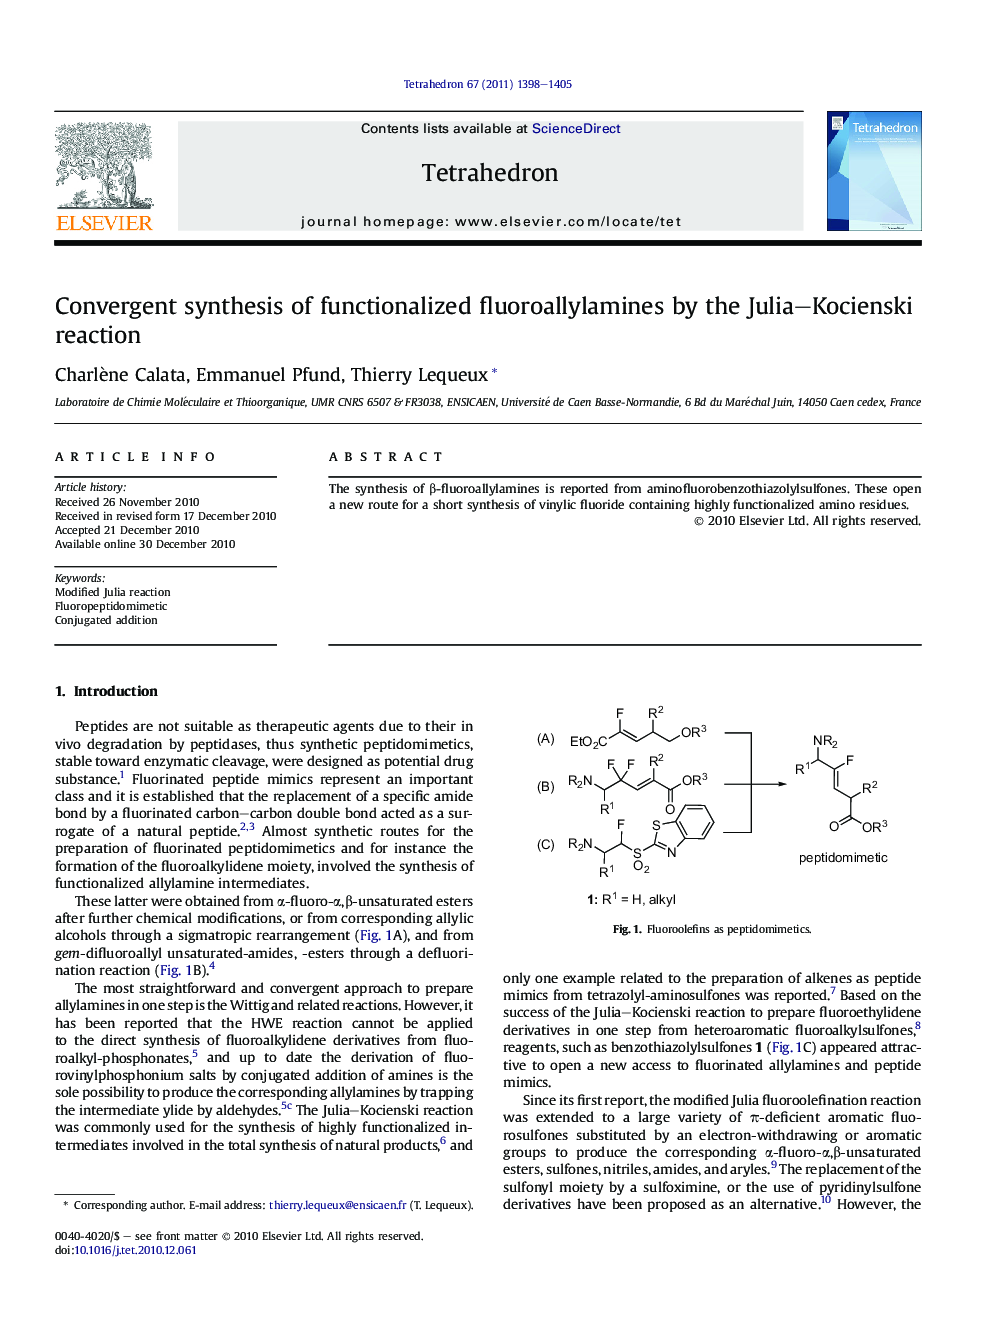 Convergent synthesis of functionalized fluoroallylamines by the Julia–Kocienski reaction